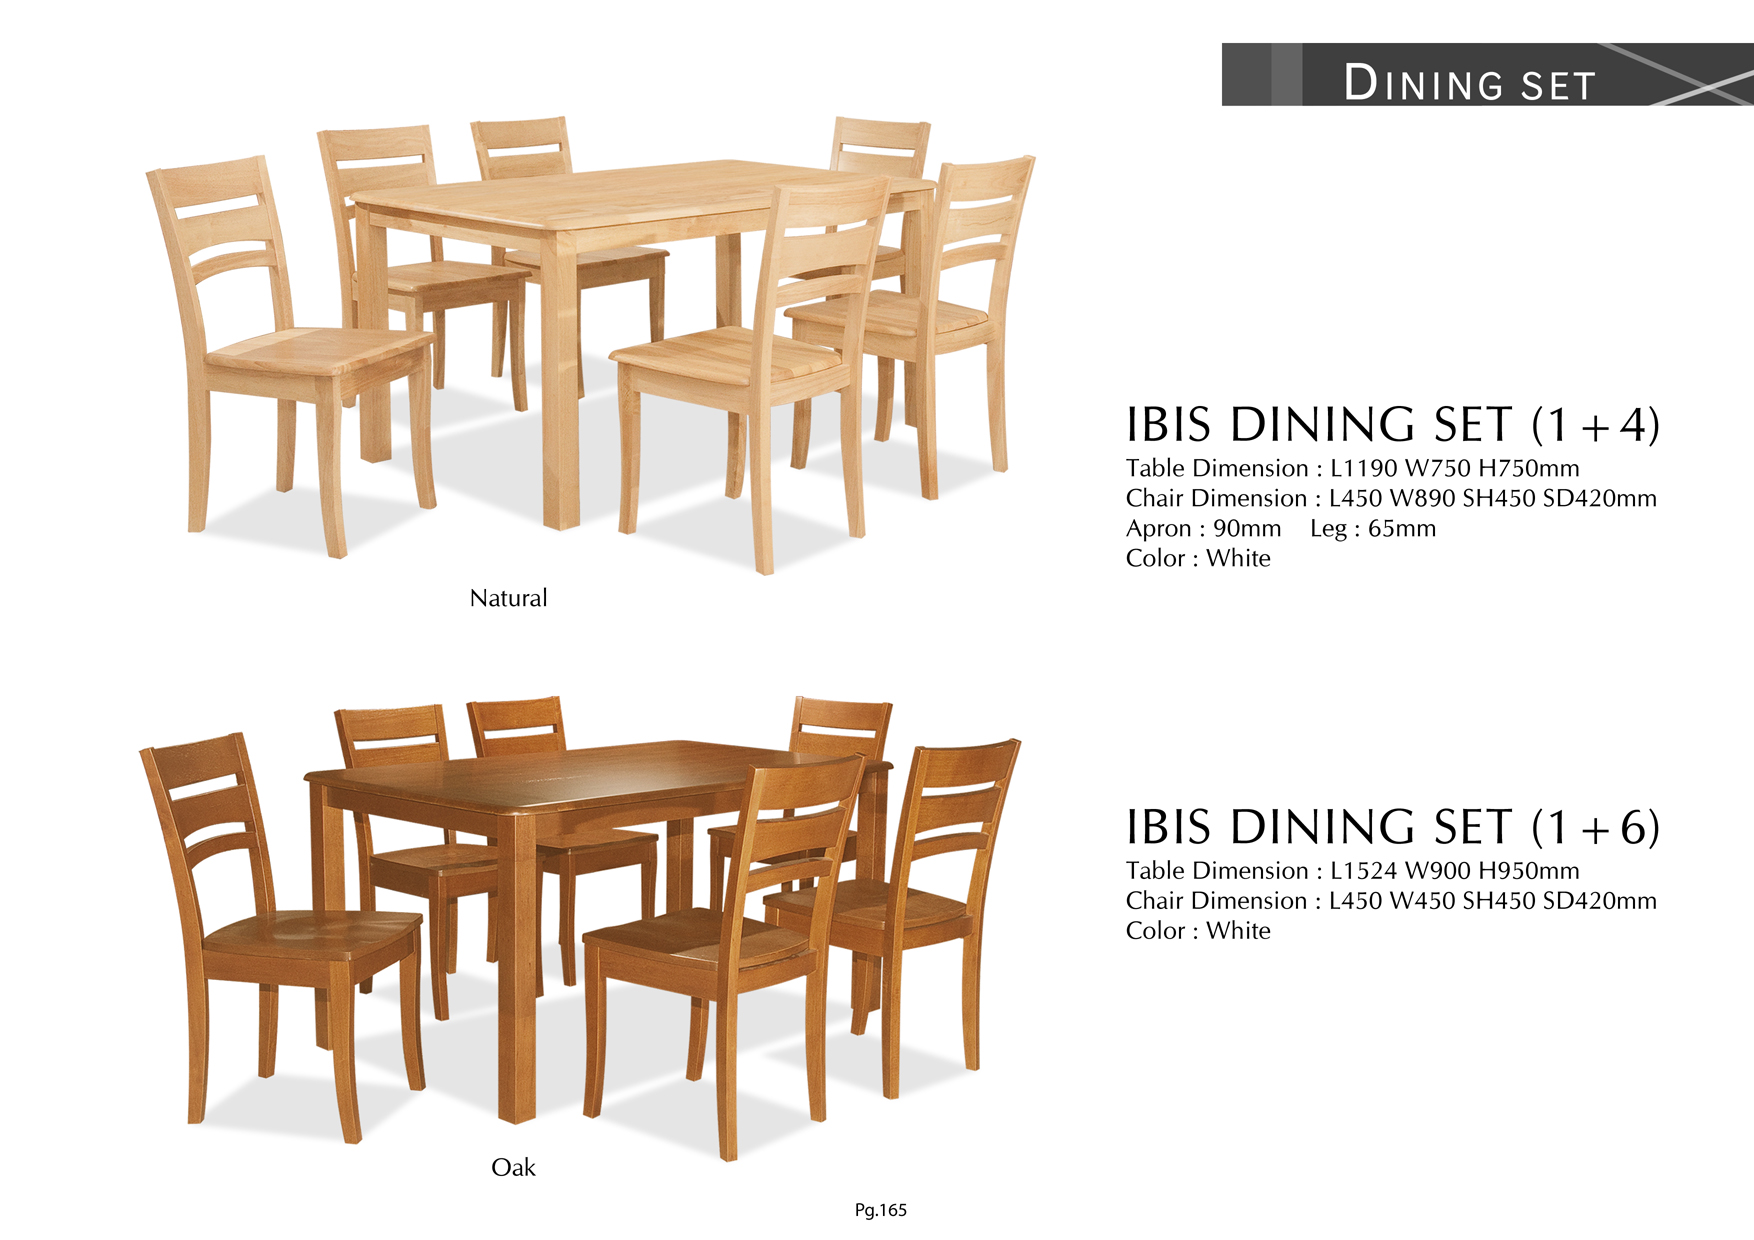 Product: PG165. IBIS DINING SET